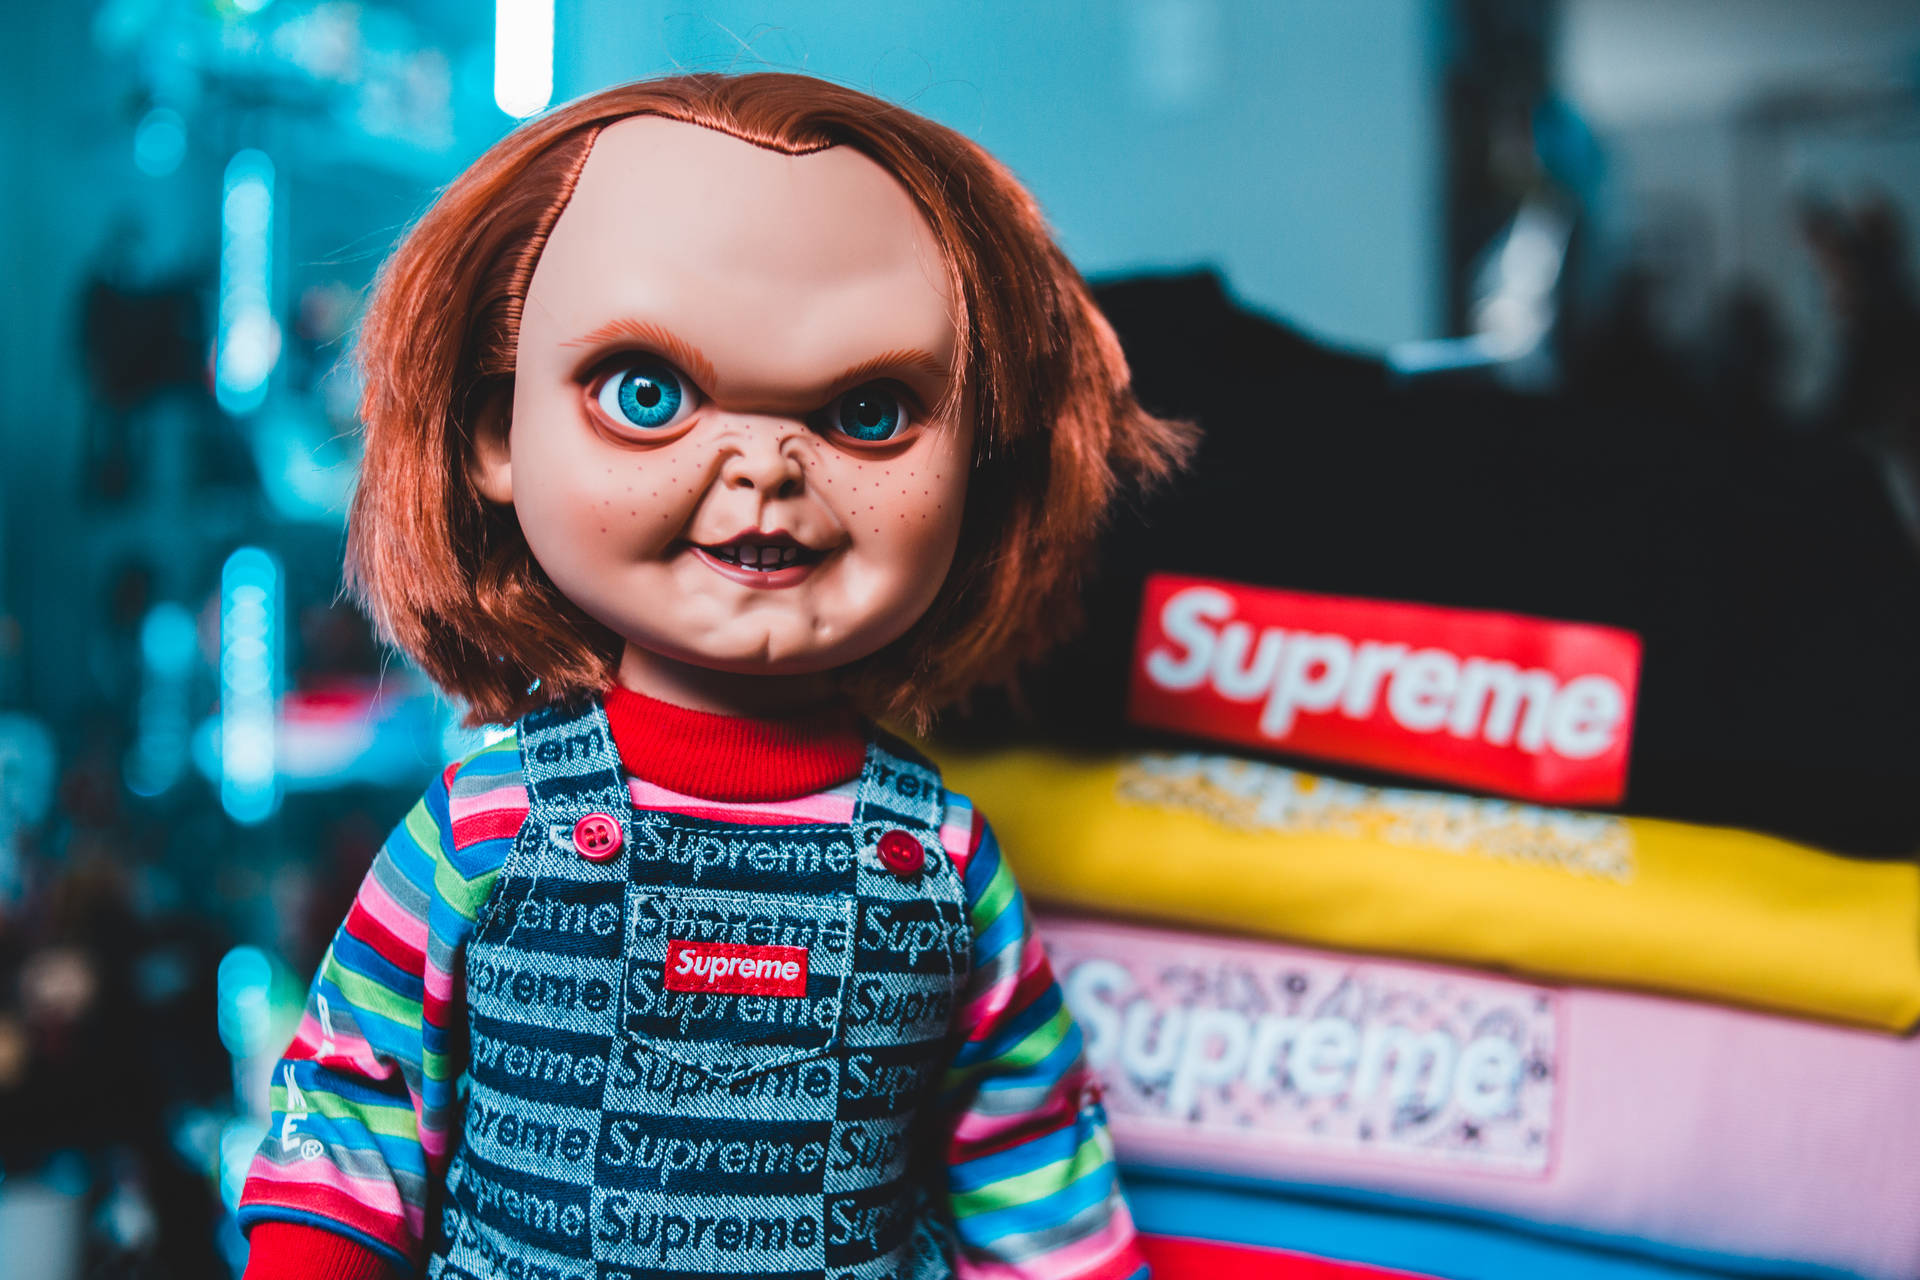 Free Chucky Wallpaper Downloads, [100+] Chucky Wallpapers for FREE |  